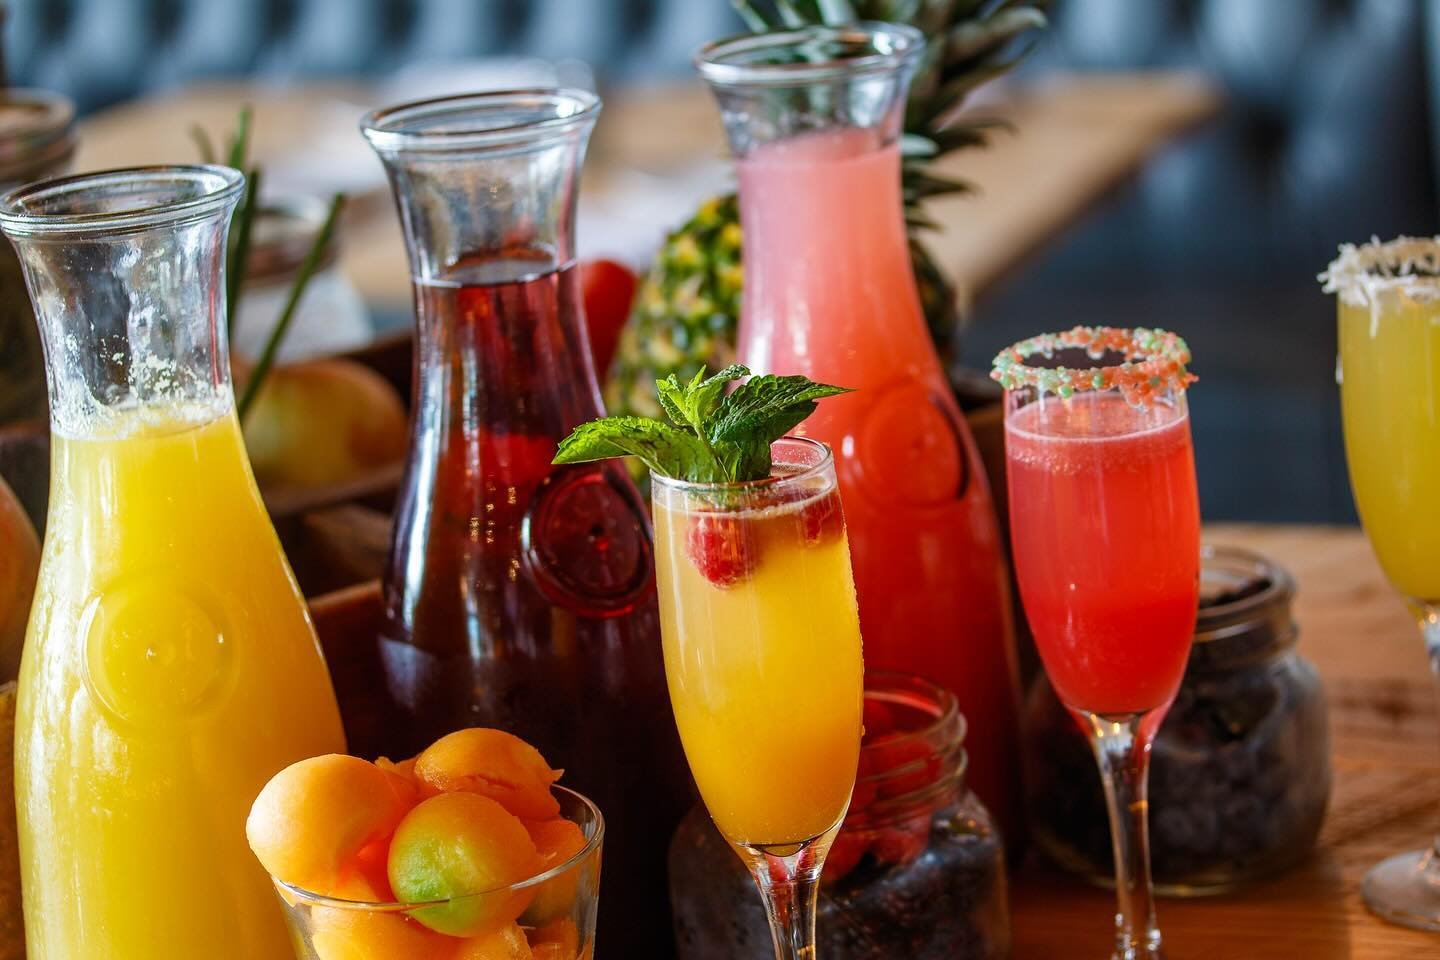 Raise a toast to Mom this Mother&rsquo;s Day at Scout&rsquo;s Pub Westhaven! 🥂 Treat her to the ultimate brunch experience with our Mimosa and Bloody Mary Bar, where she can customize her perfect sip while enjoying delicious eats in a cozy atmospher